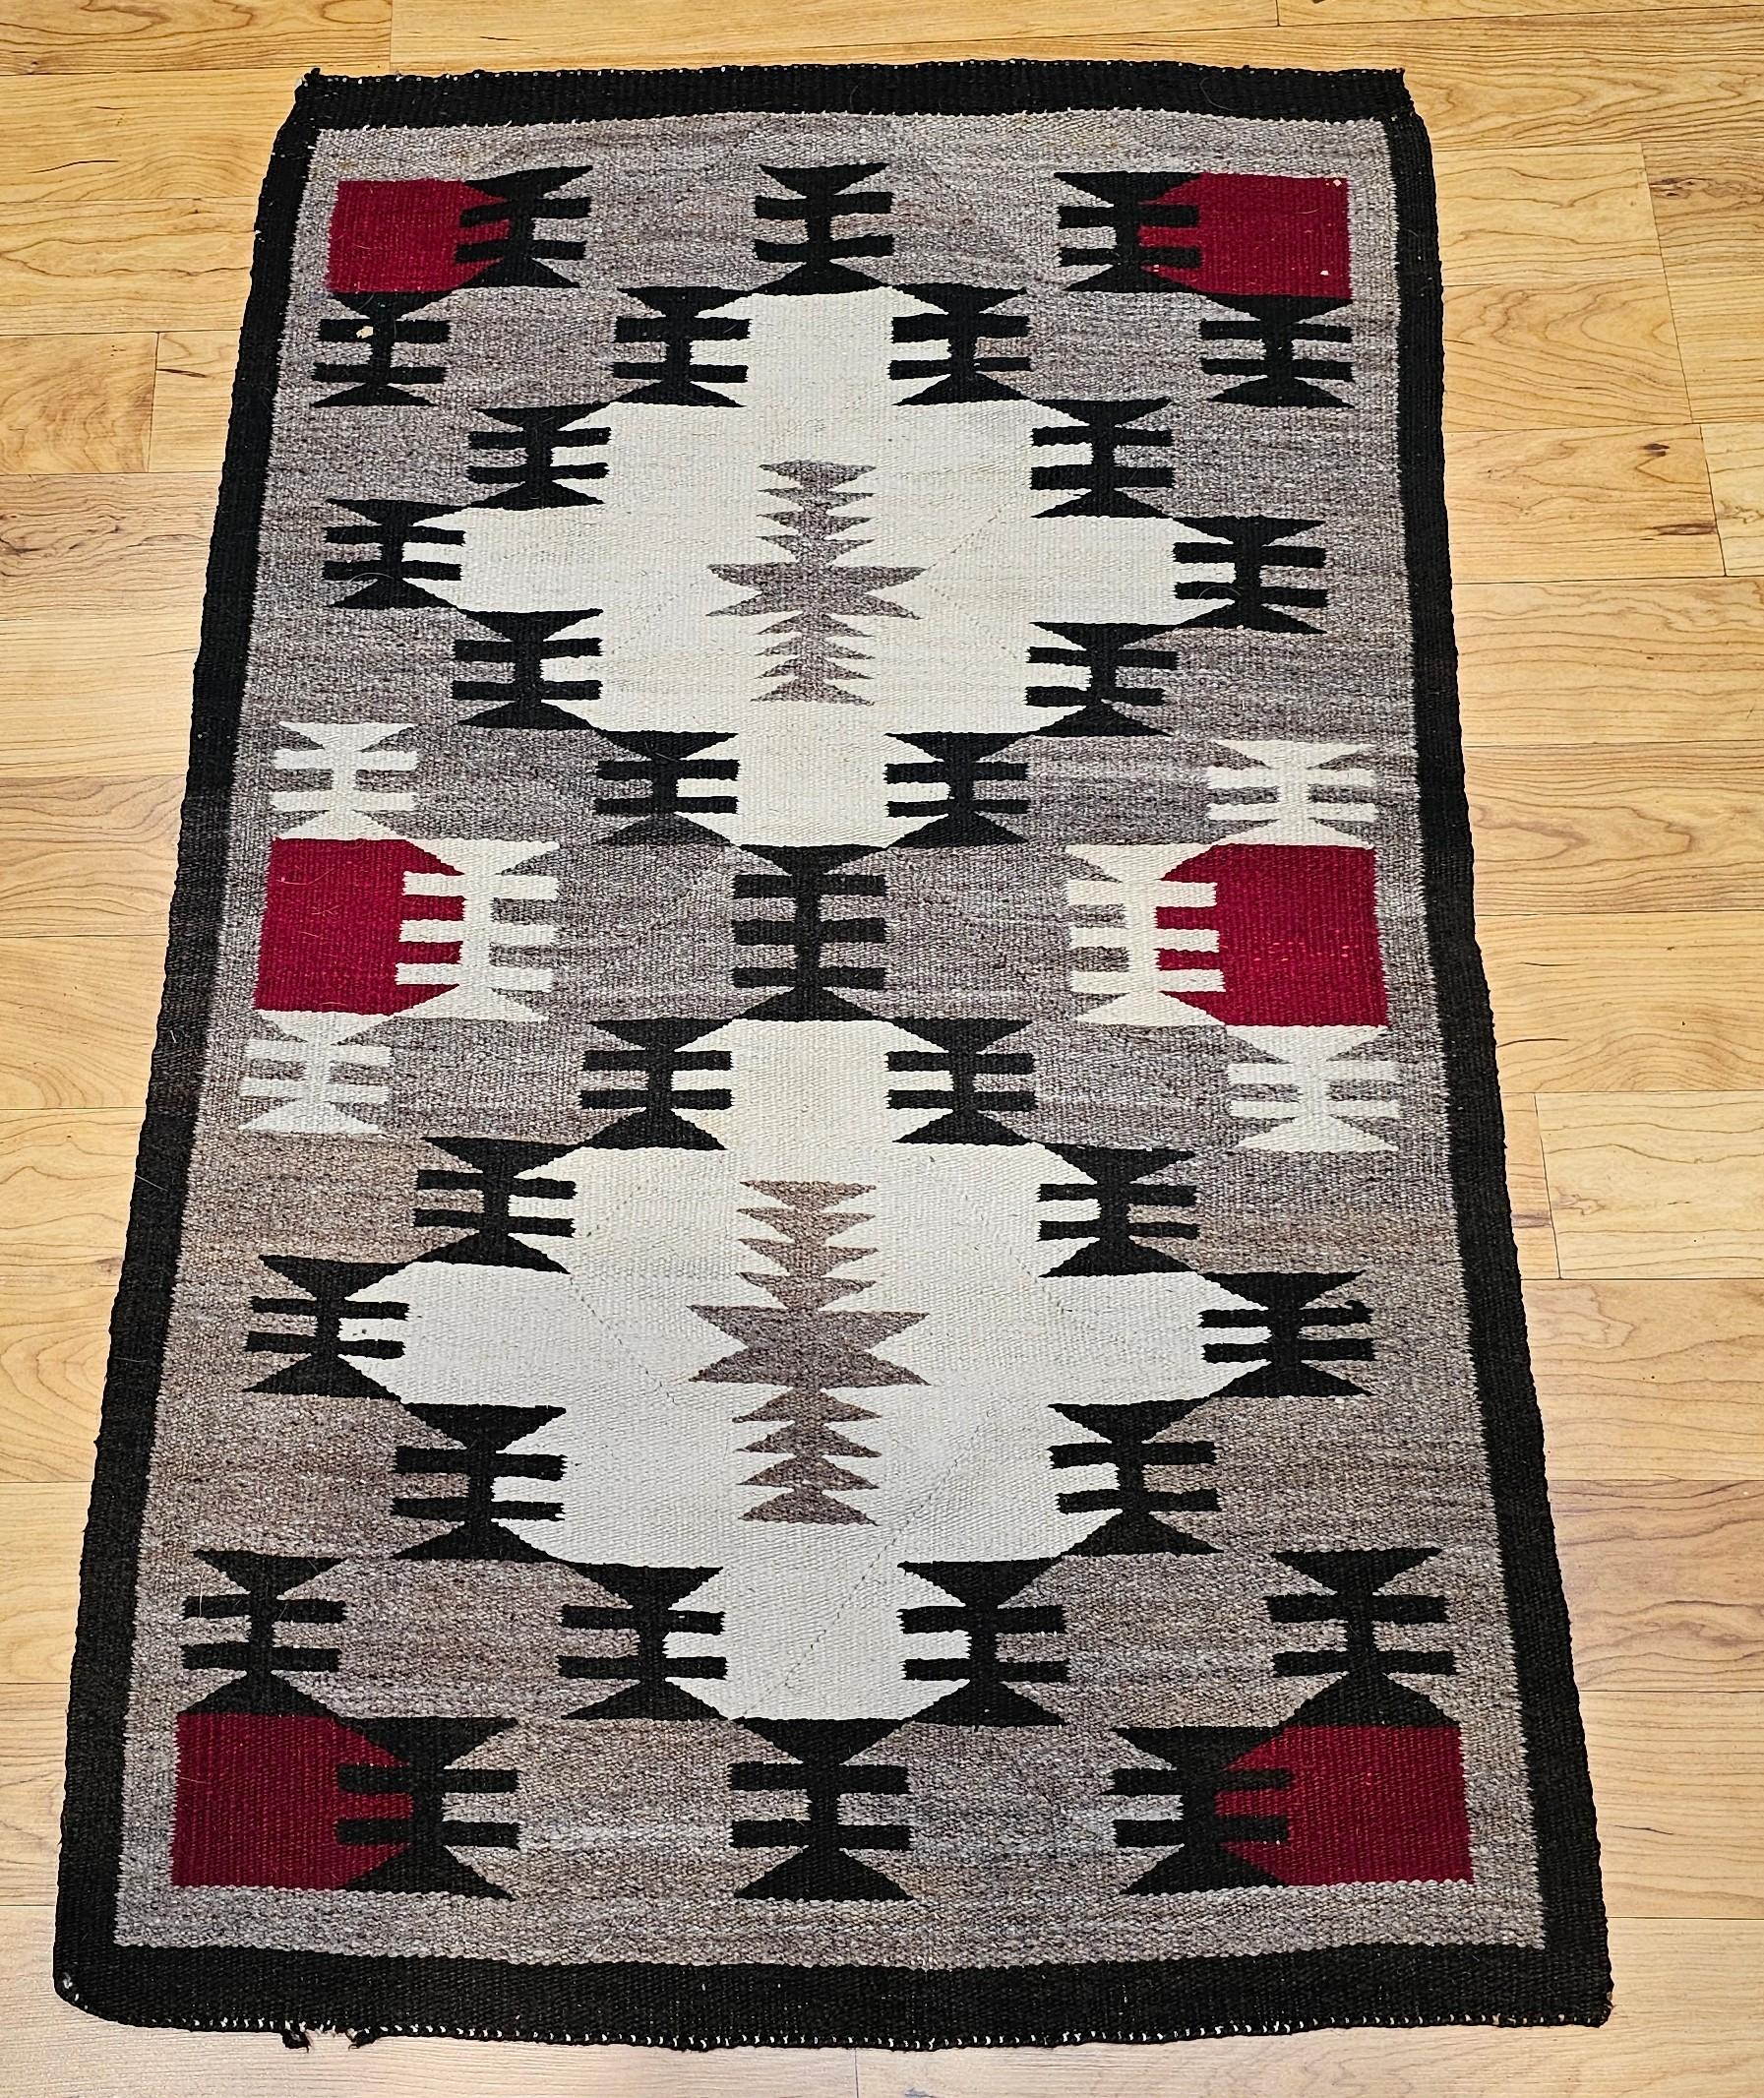  Finely hand-woven Native American Navajo Rug in ivory, red, gray, and black colors from the SW United States from the early 1900s.  This Navajo rug is in a geometric pattern consisting of two large medallions set in a beautiful natural organic dye